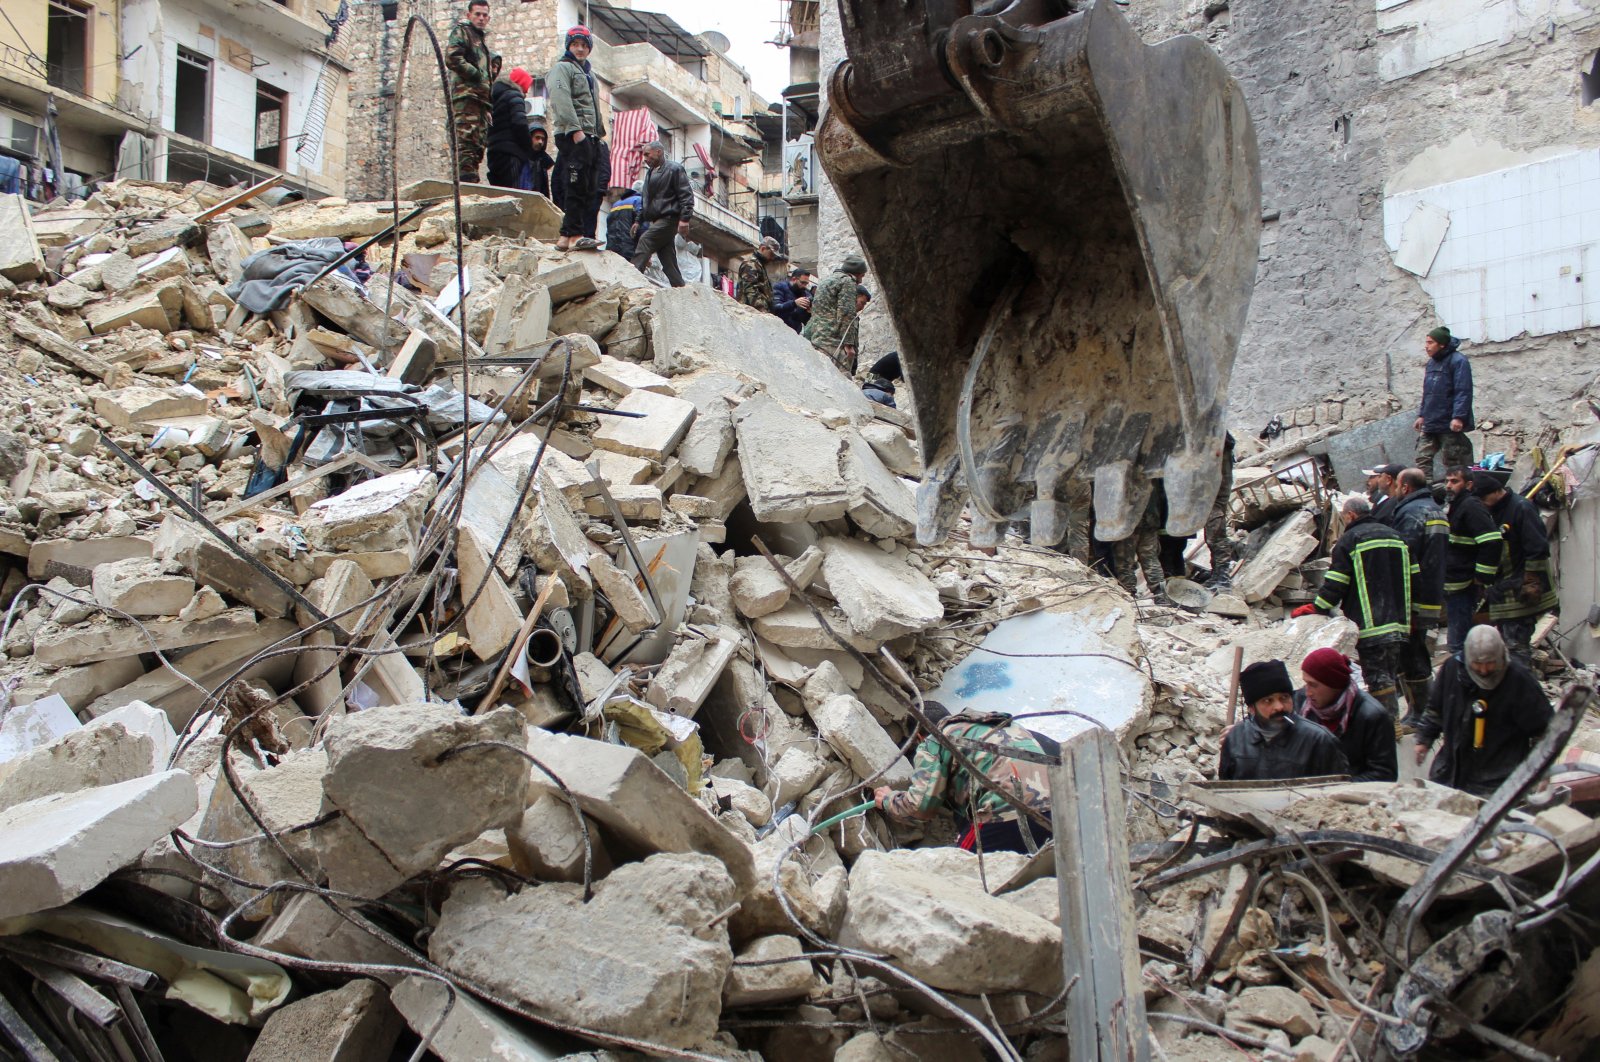 Rescuers search for survivors under the rubble, following an earthquake, in Aleppo, Syria, Feb. 6, 2023. (Reuters Photo)